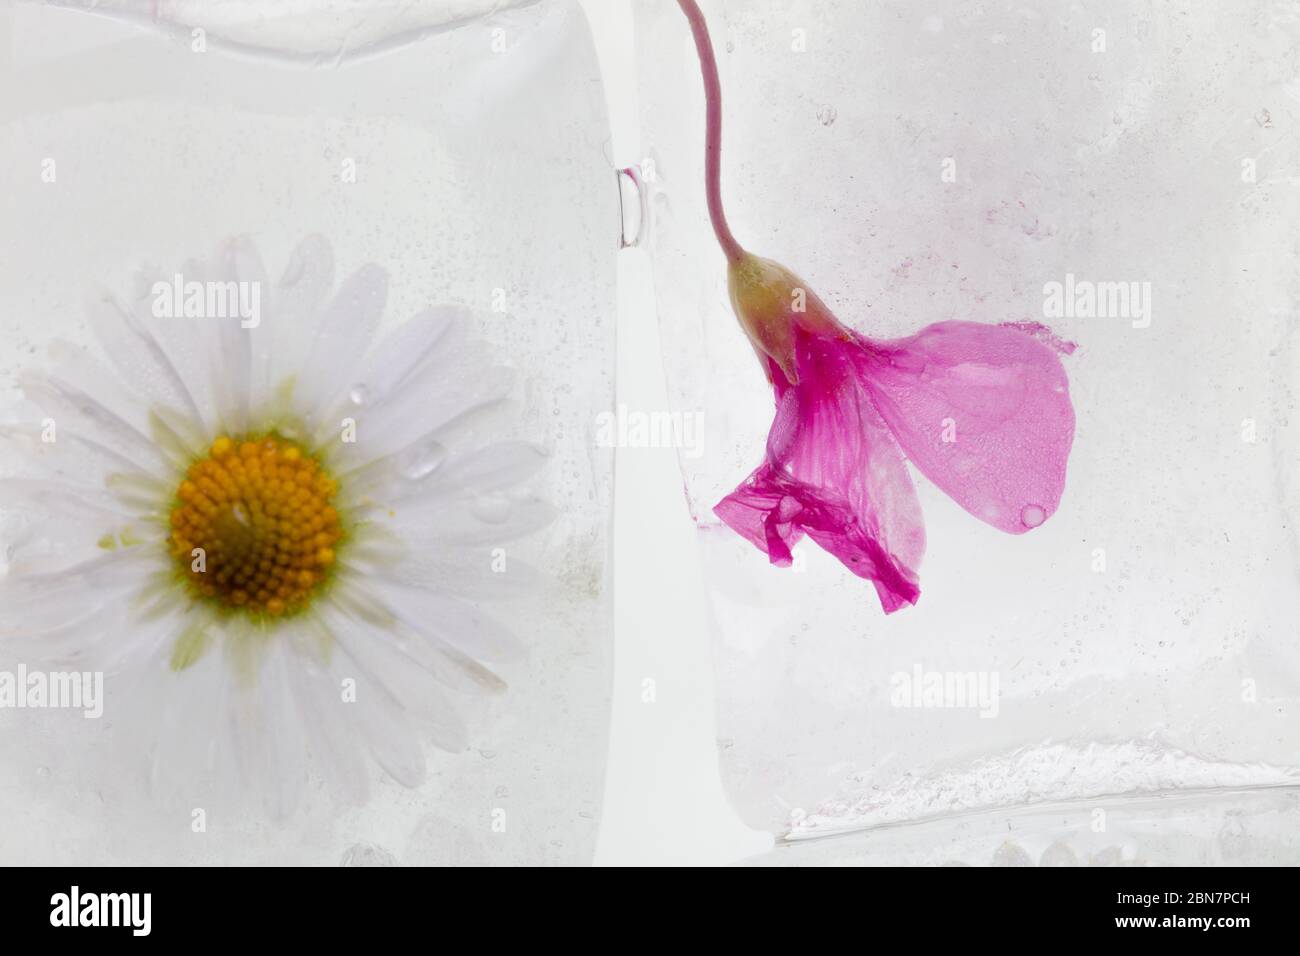 a photograph of wild spring flowers frozen in transparent melting ice cubes of water, studio macro shot, detail Stock Photo